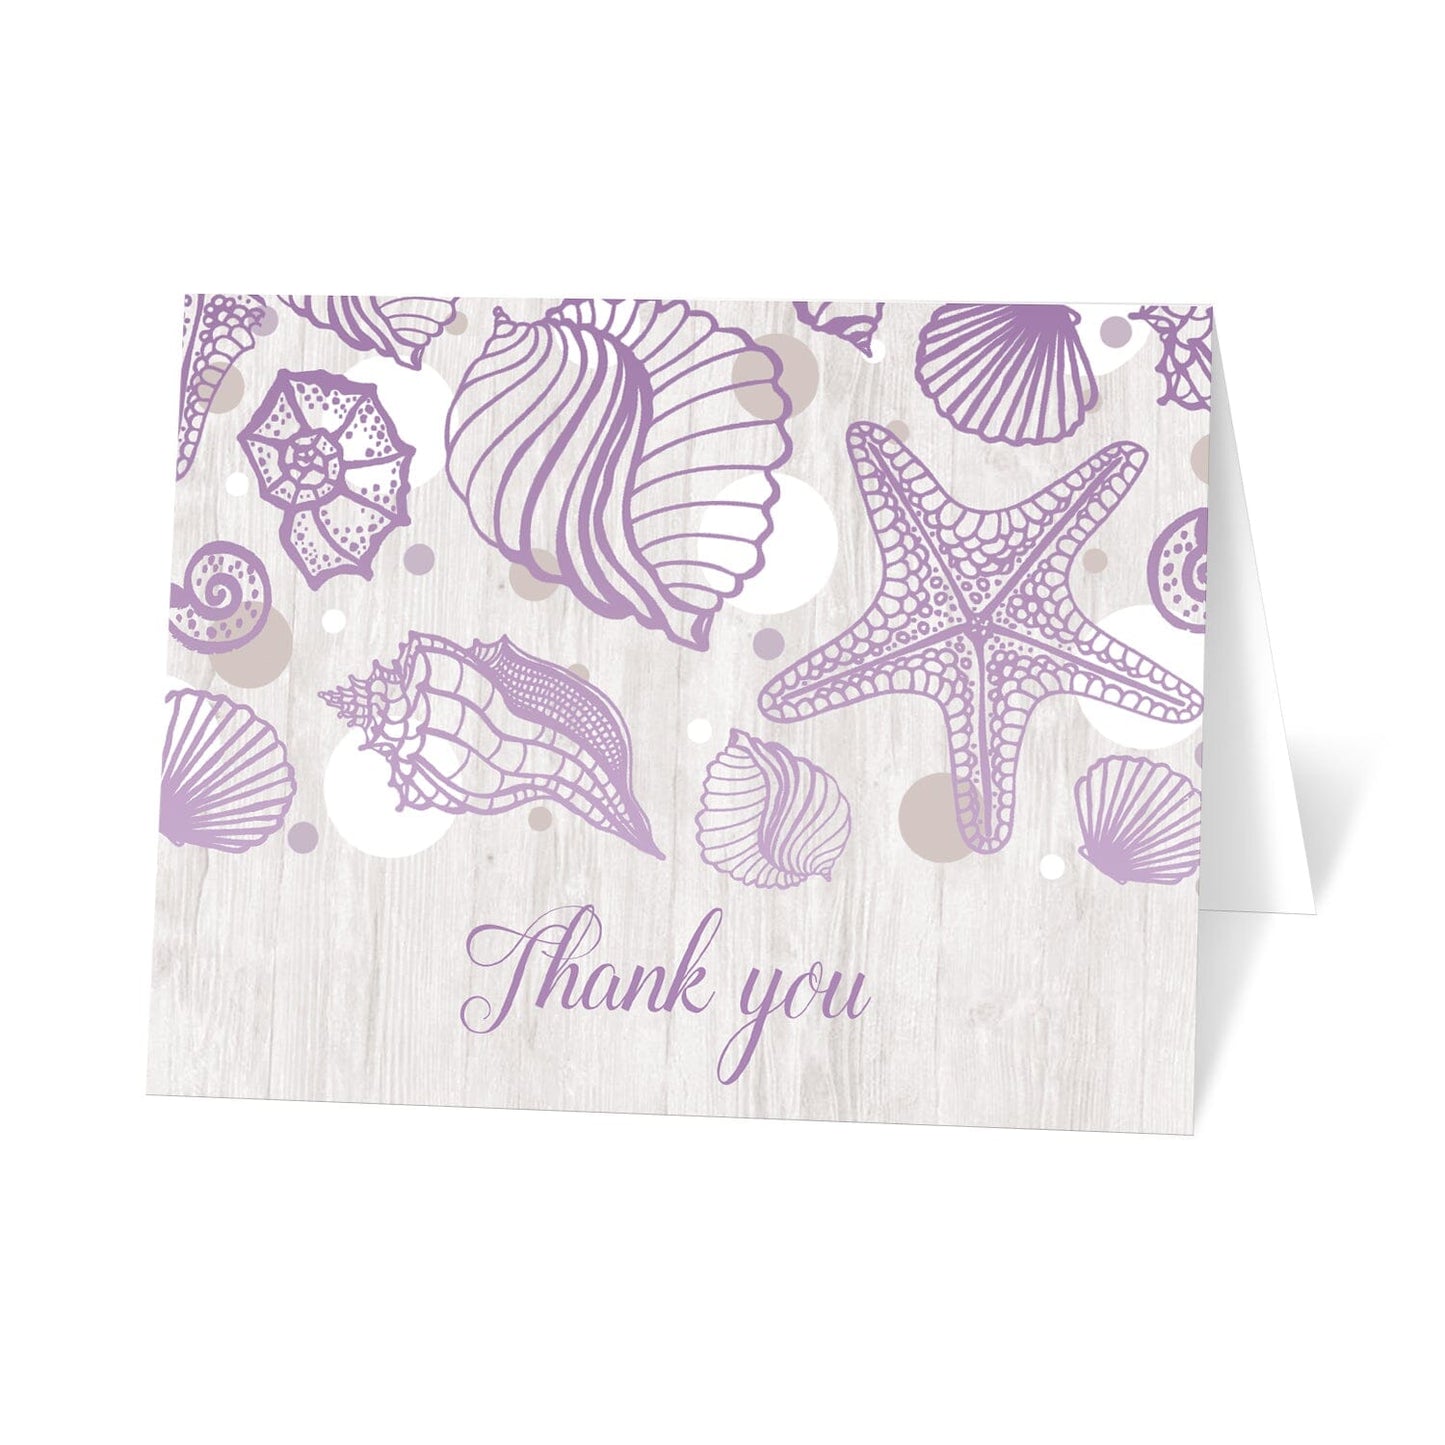 Seashell Whitewashed Wood Purple Beach Thank You Cards at Artistically Invited. Seashell whitewashed wood purple beach thank you cards with a purple seashell outline drawing, tan and white dots, over a light whitewashed wood background illustration. The seashell line drawing over the varying sized circles are the modern element in this design, while the unique whitewashed wood adds the rustic touch. "Thank you" is printed in a purple script font below the seashells over the whitewashed wood.